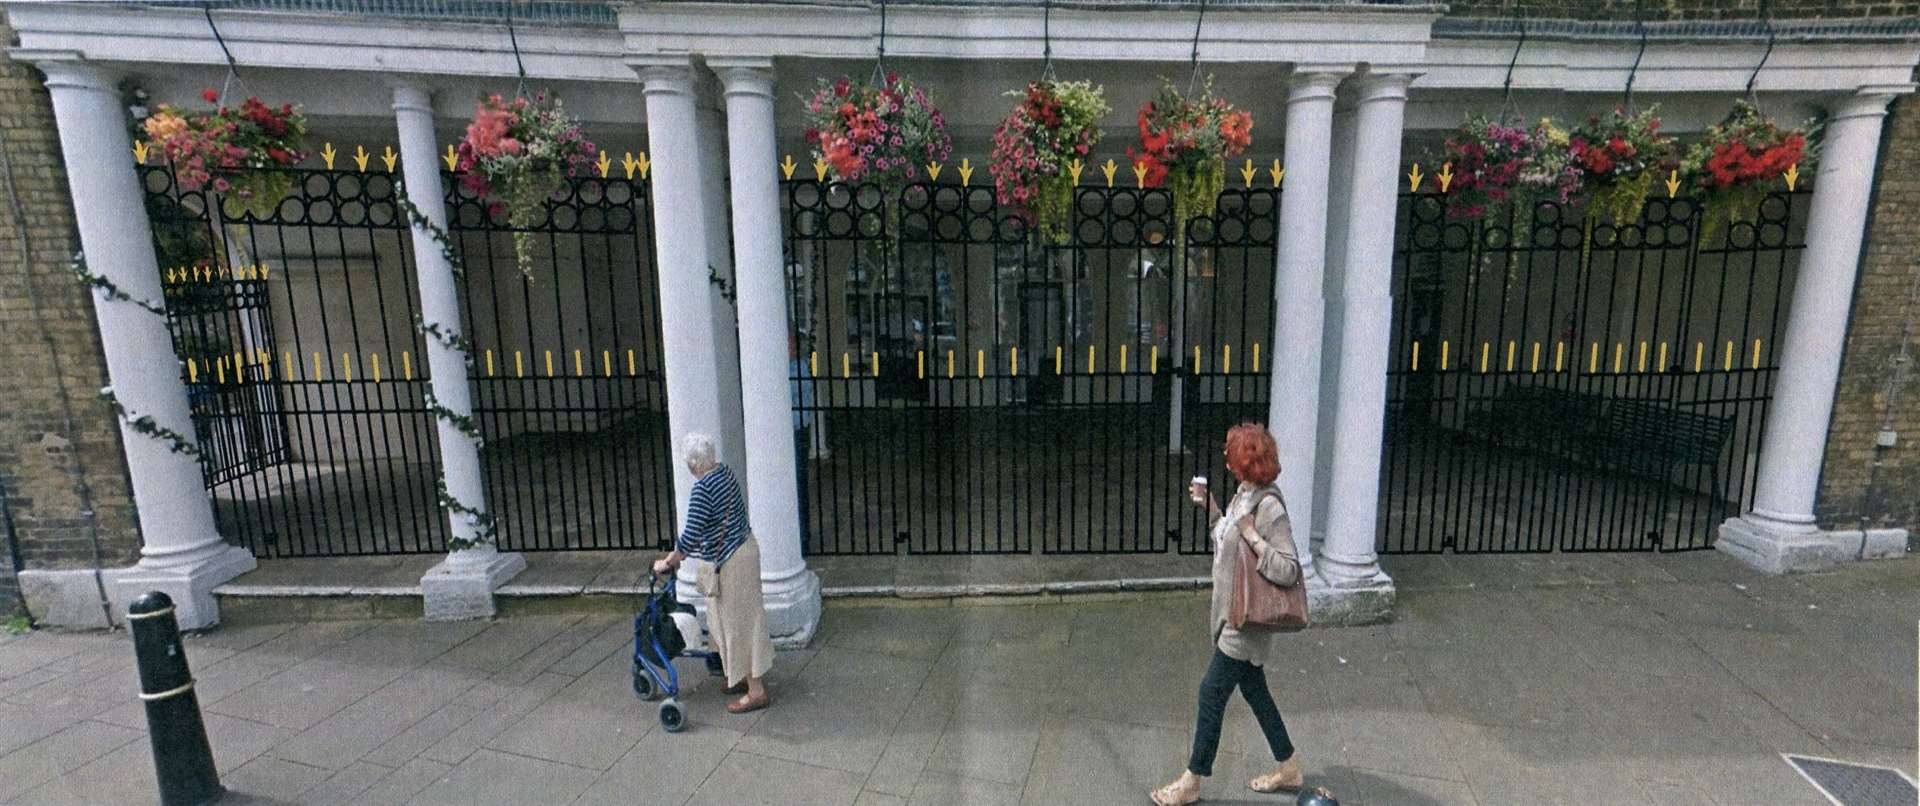 The railings could look something like this. Photograph originally taken from Google Maps